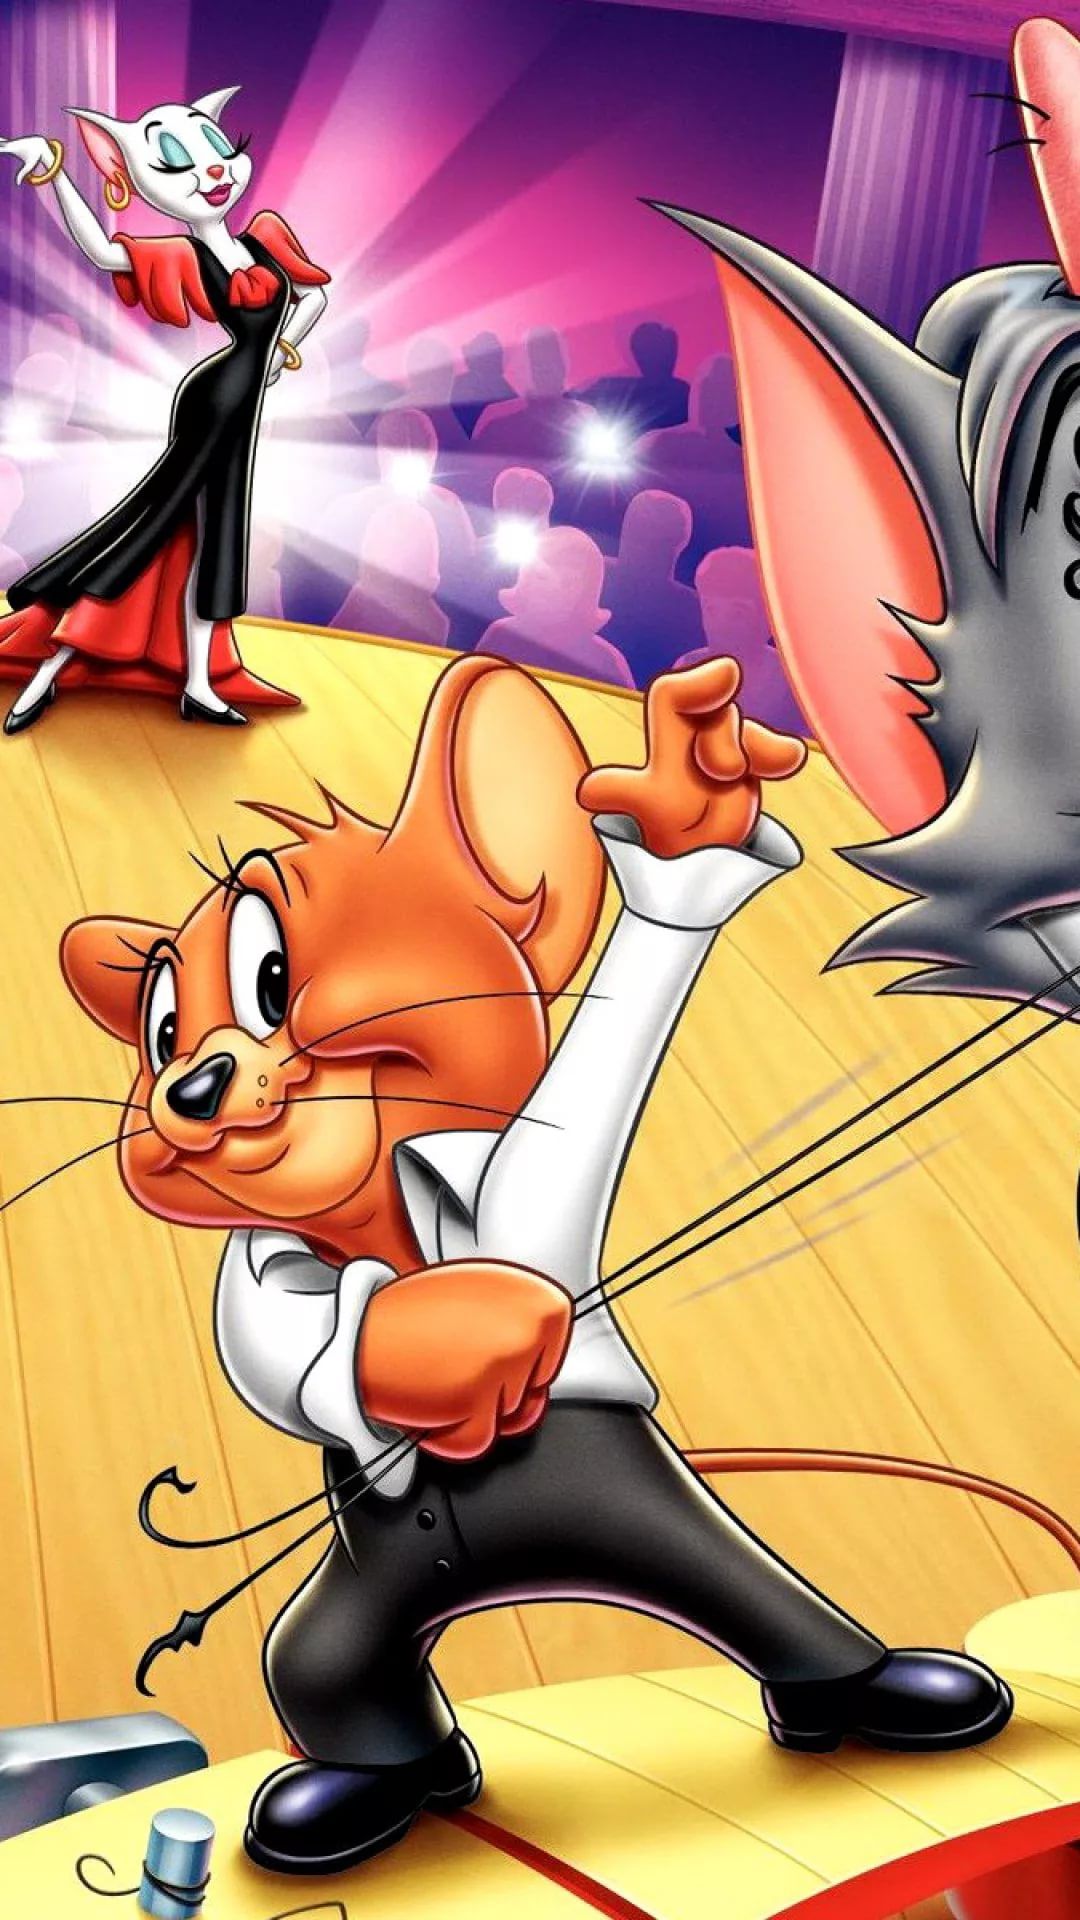 Tom And Jerry hd wallpaper for Android